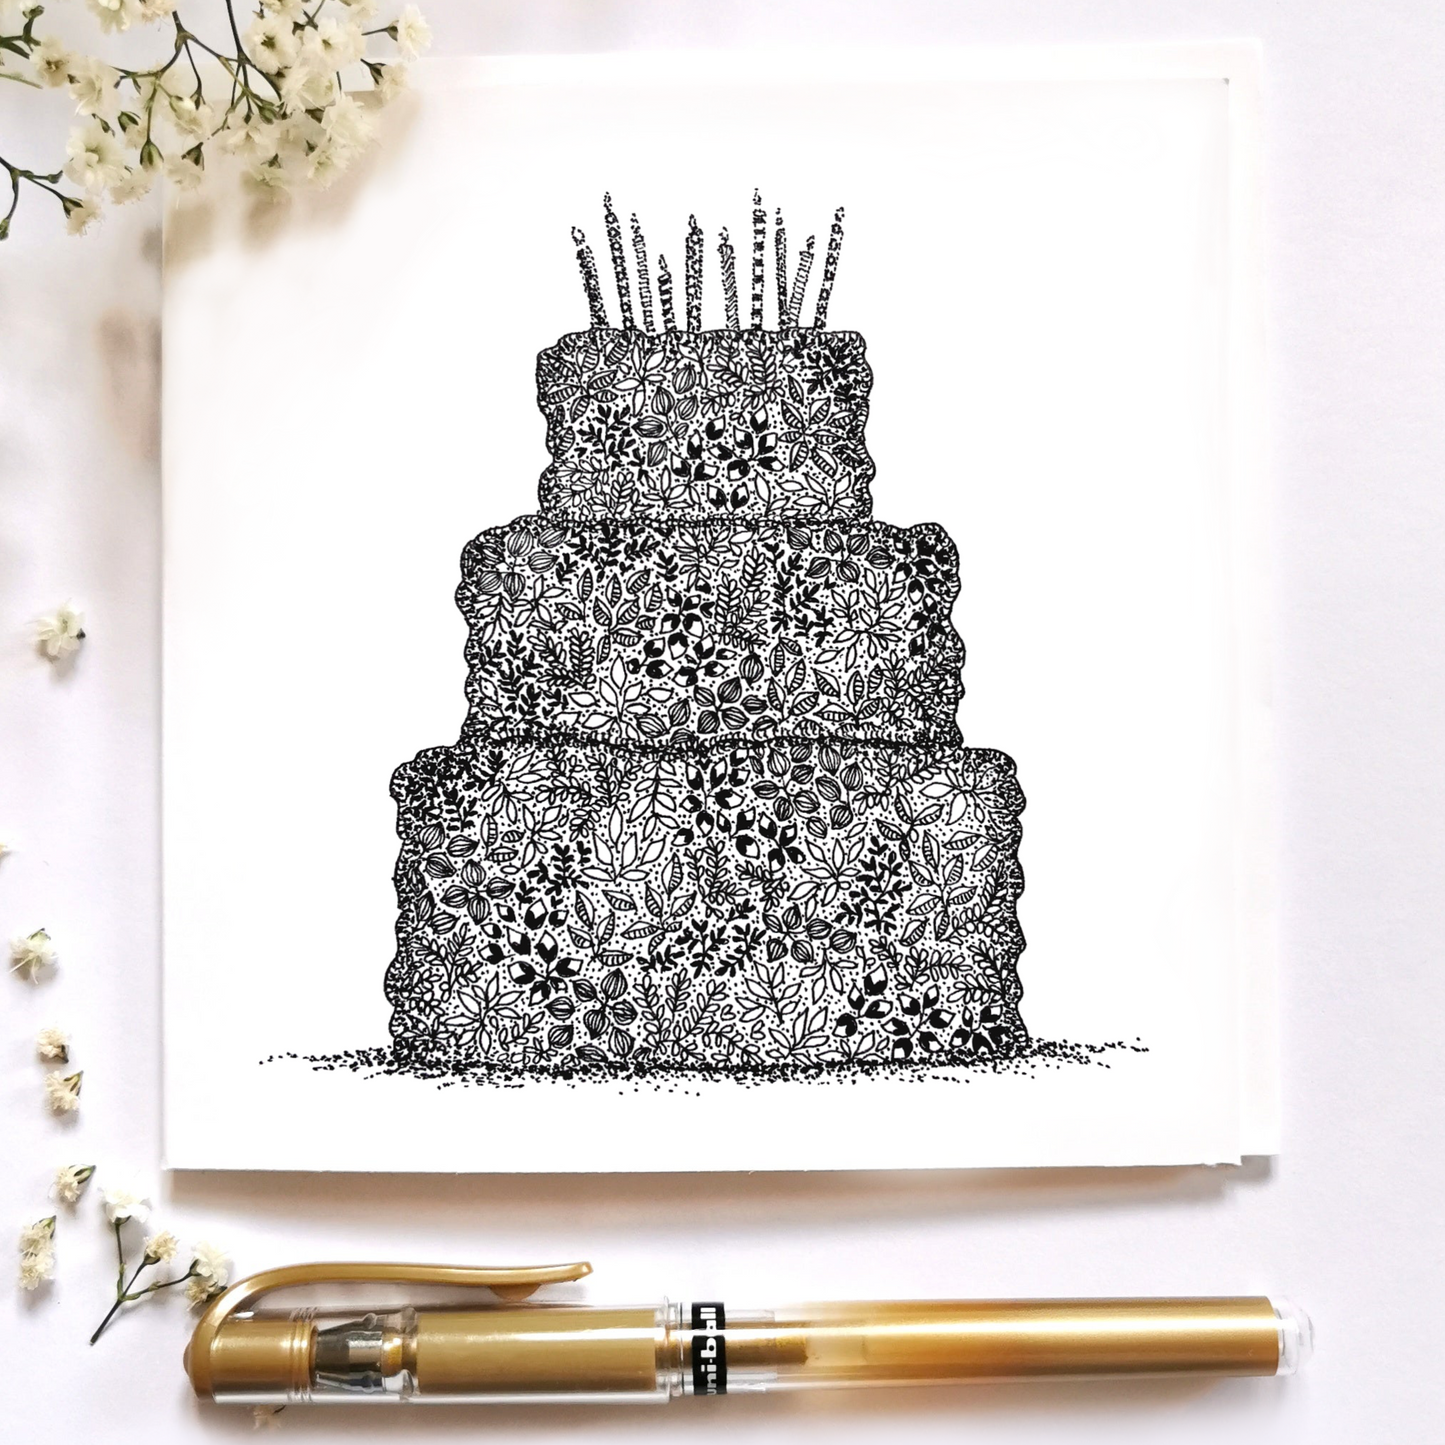 Image shows three tier birthday cake illustration drawn mostly up of a variety of flowers. 10 Candles are places on top of the cake with little dots at bottom of the cake to showcase the height of the cake. Image is places on top of a cream background with white flowers top left and bottom left corner and a gold pen at the bottom of the page.